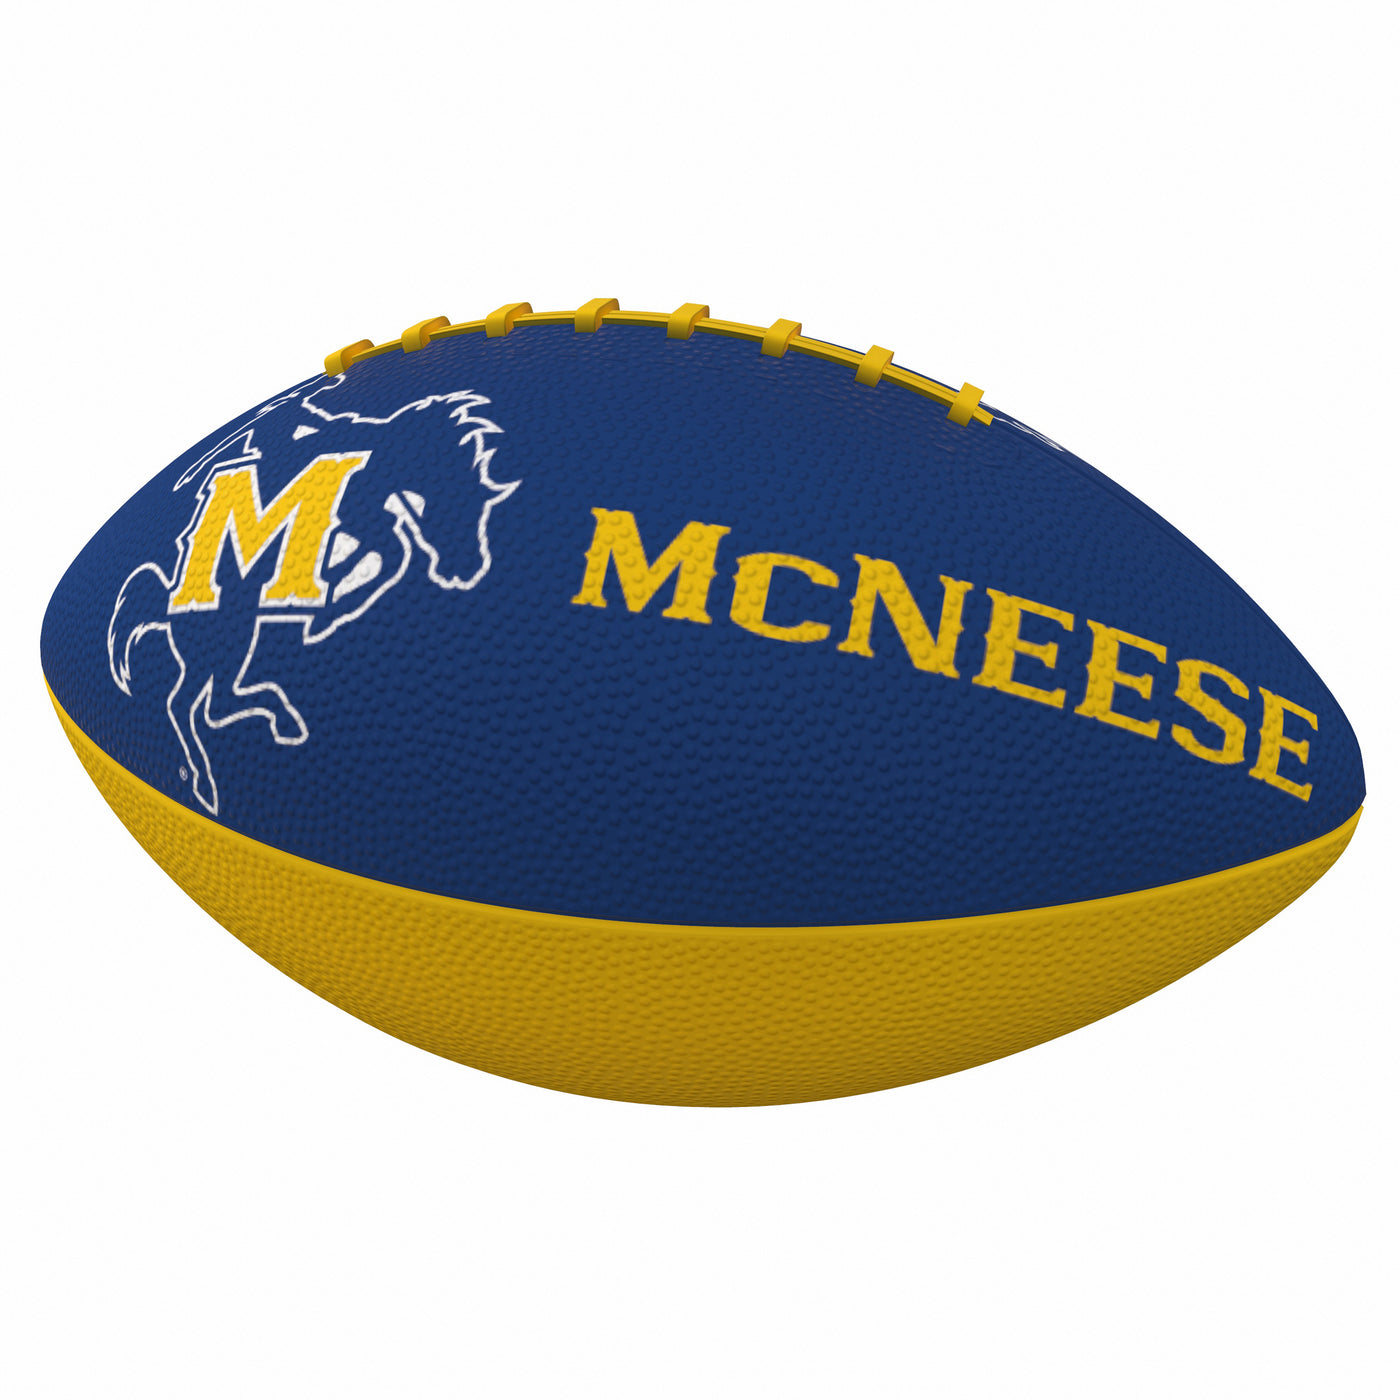 Mcneese State Combo Logo Junior-Size Rubber Football with Yellow Wdmk